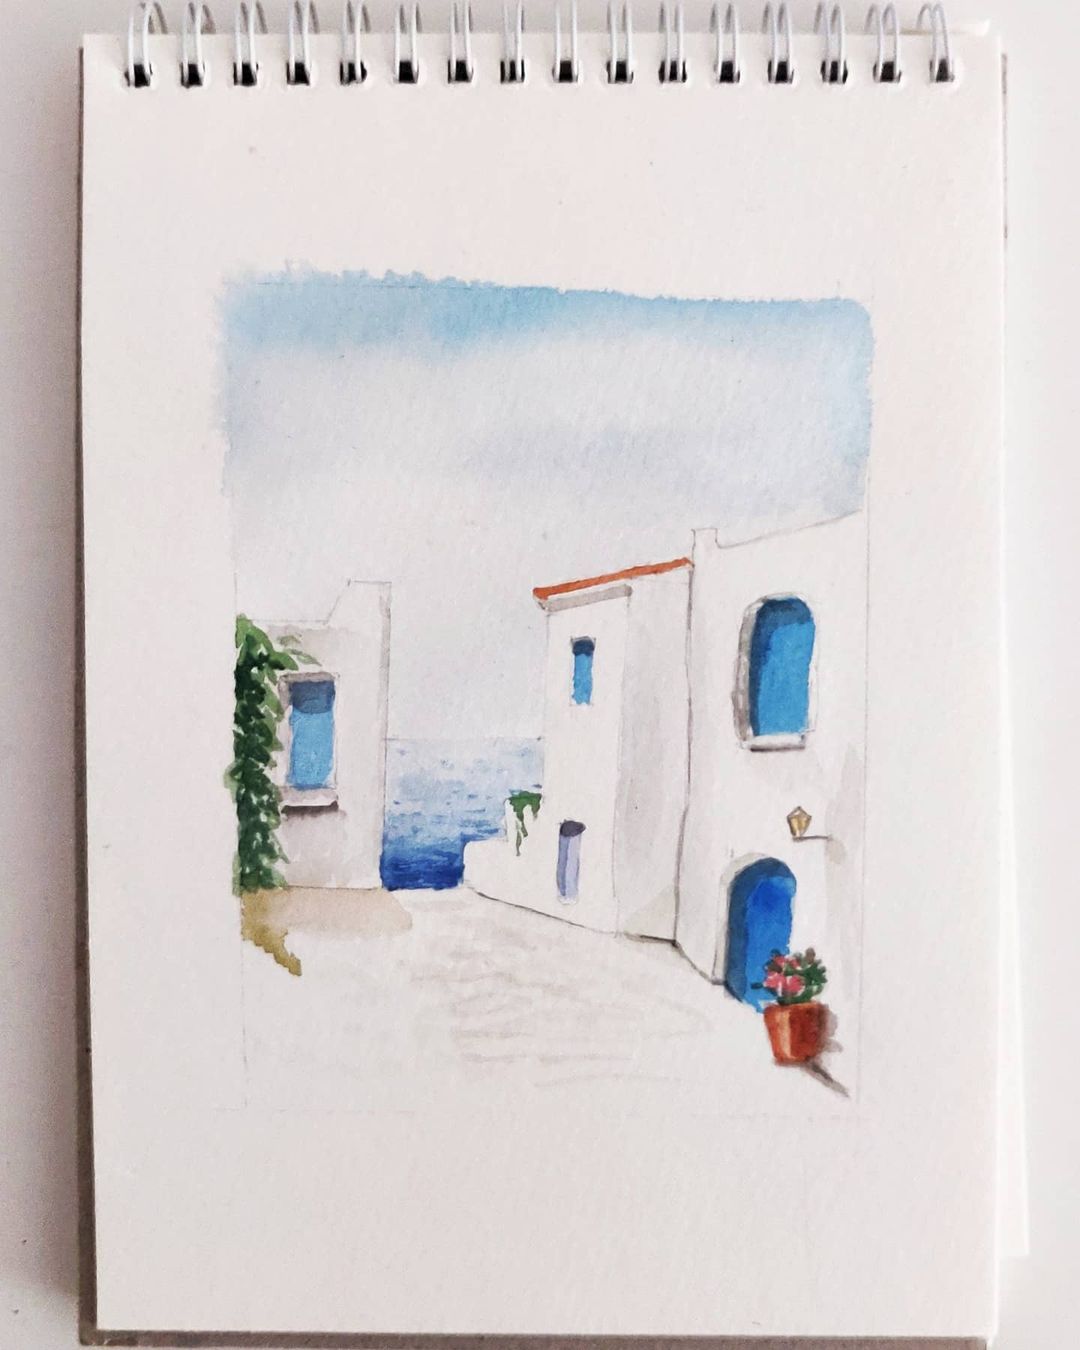 Santorini watercolour of a white building with blue windows and doors near the Mediterranean ocean.